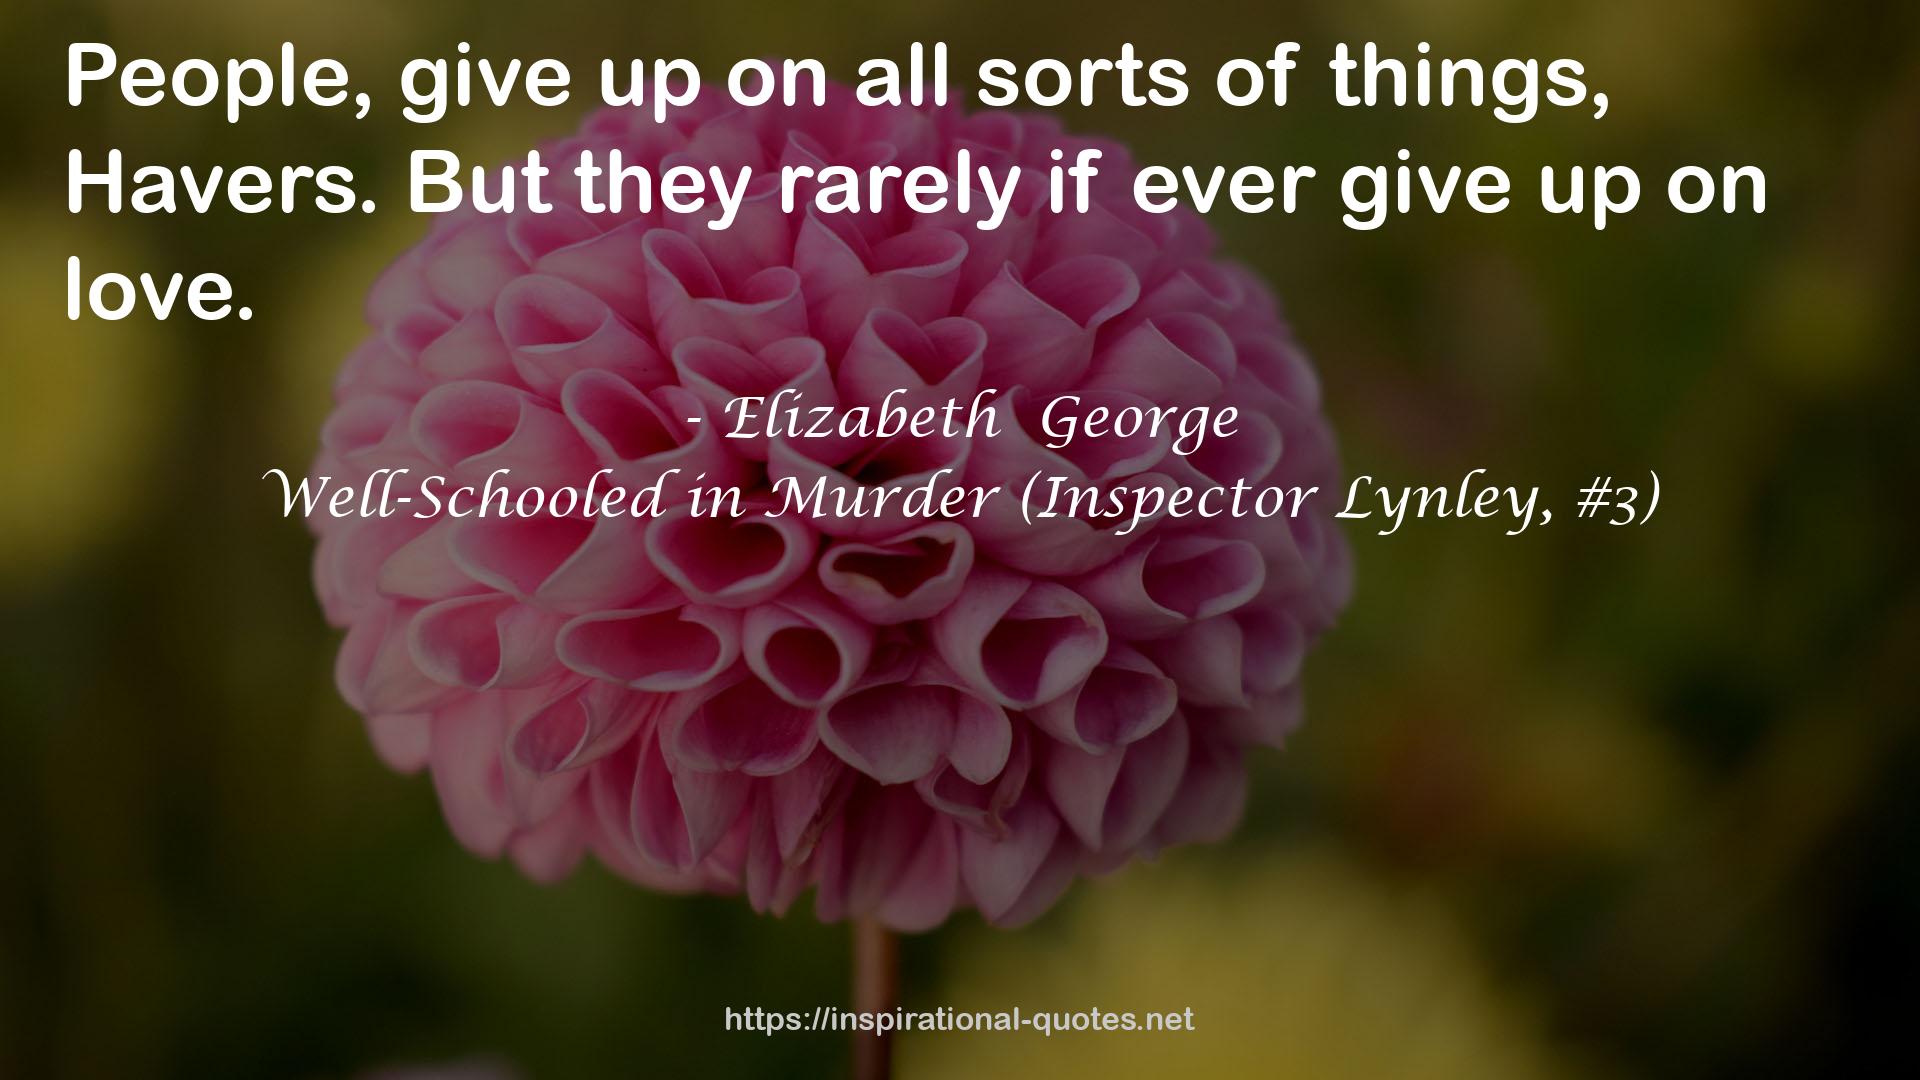 Well-Schooled in Murder (Inspector Lynley, #3) QUOTES